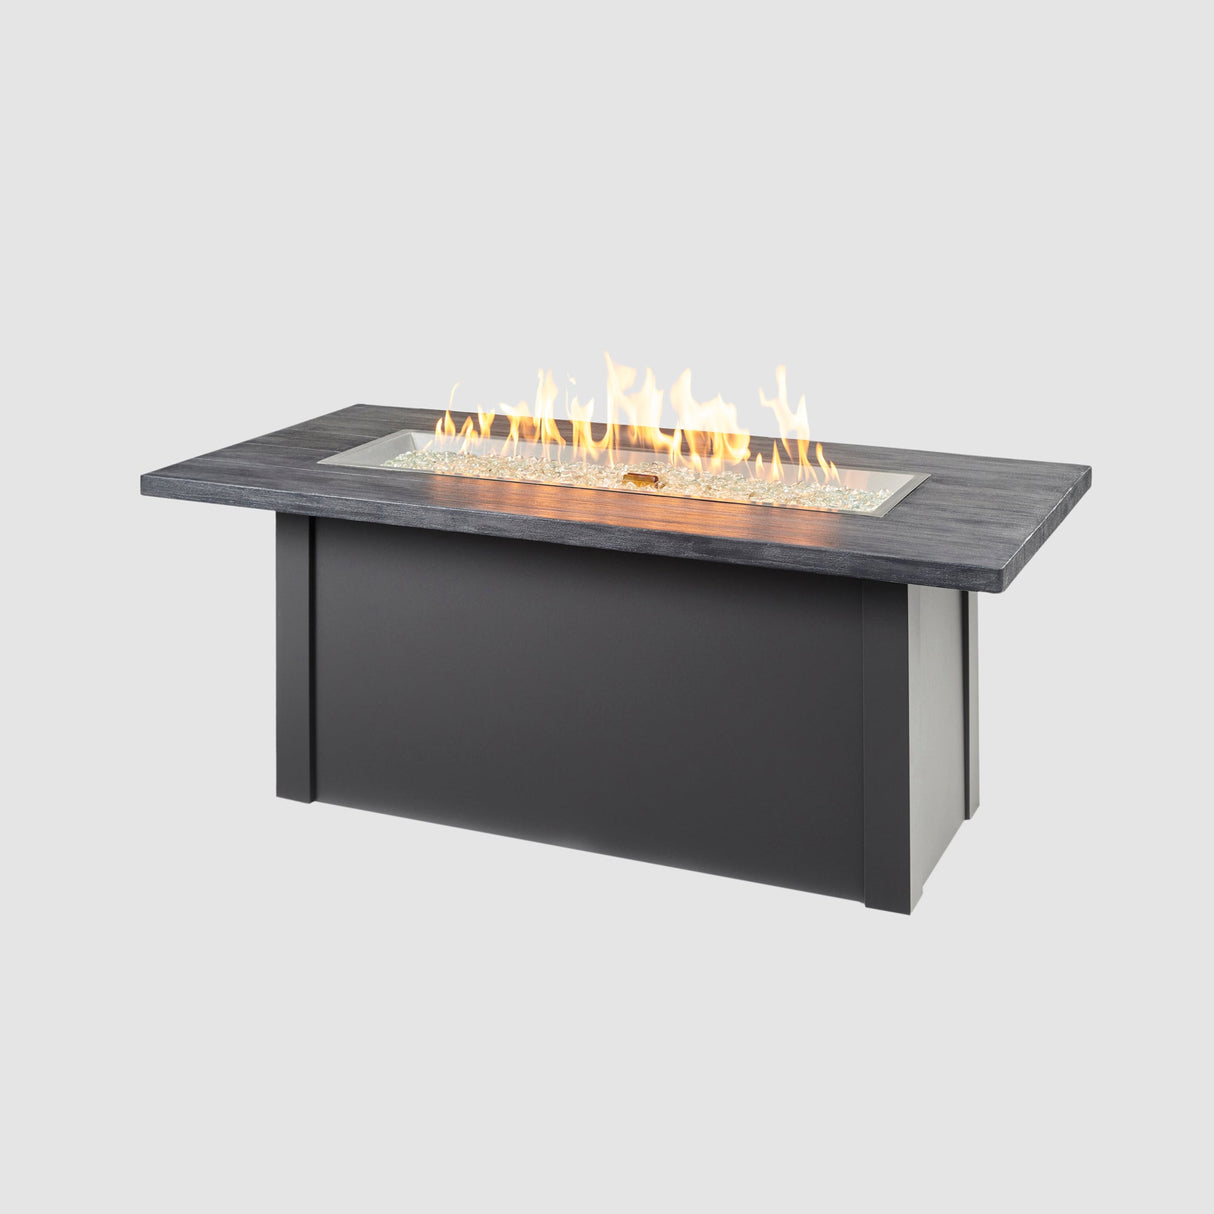 Havenwood Linear Gas Fire Pit Table with a Carbon Grey top and Graphite Grey base on a grey background